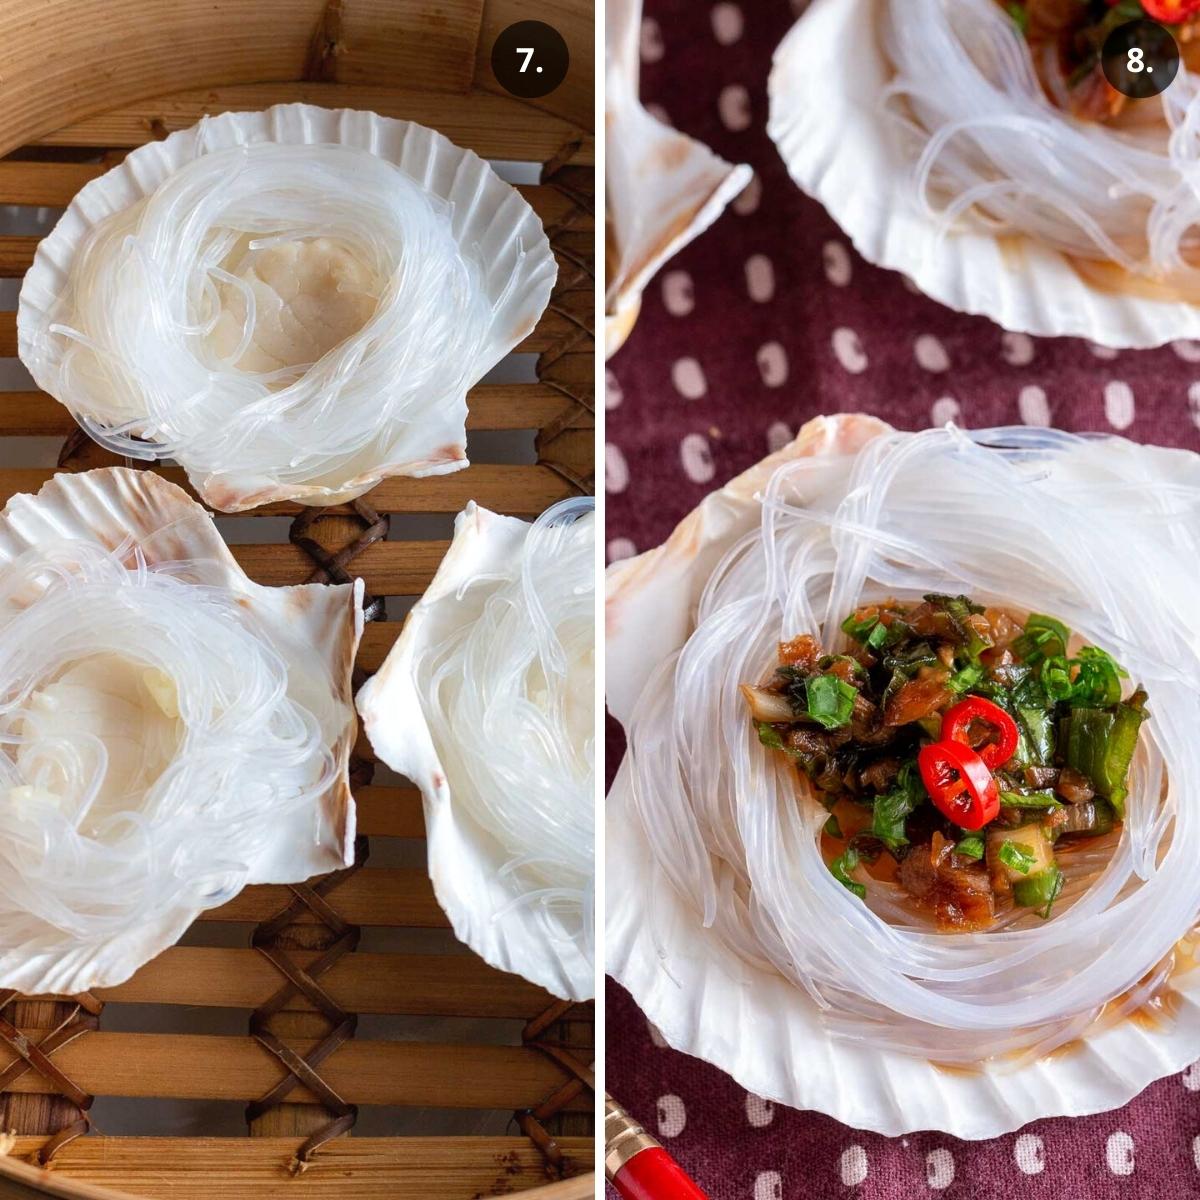 Steamed scallops garnished with garlic sauce and chilis.